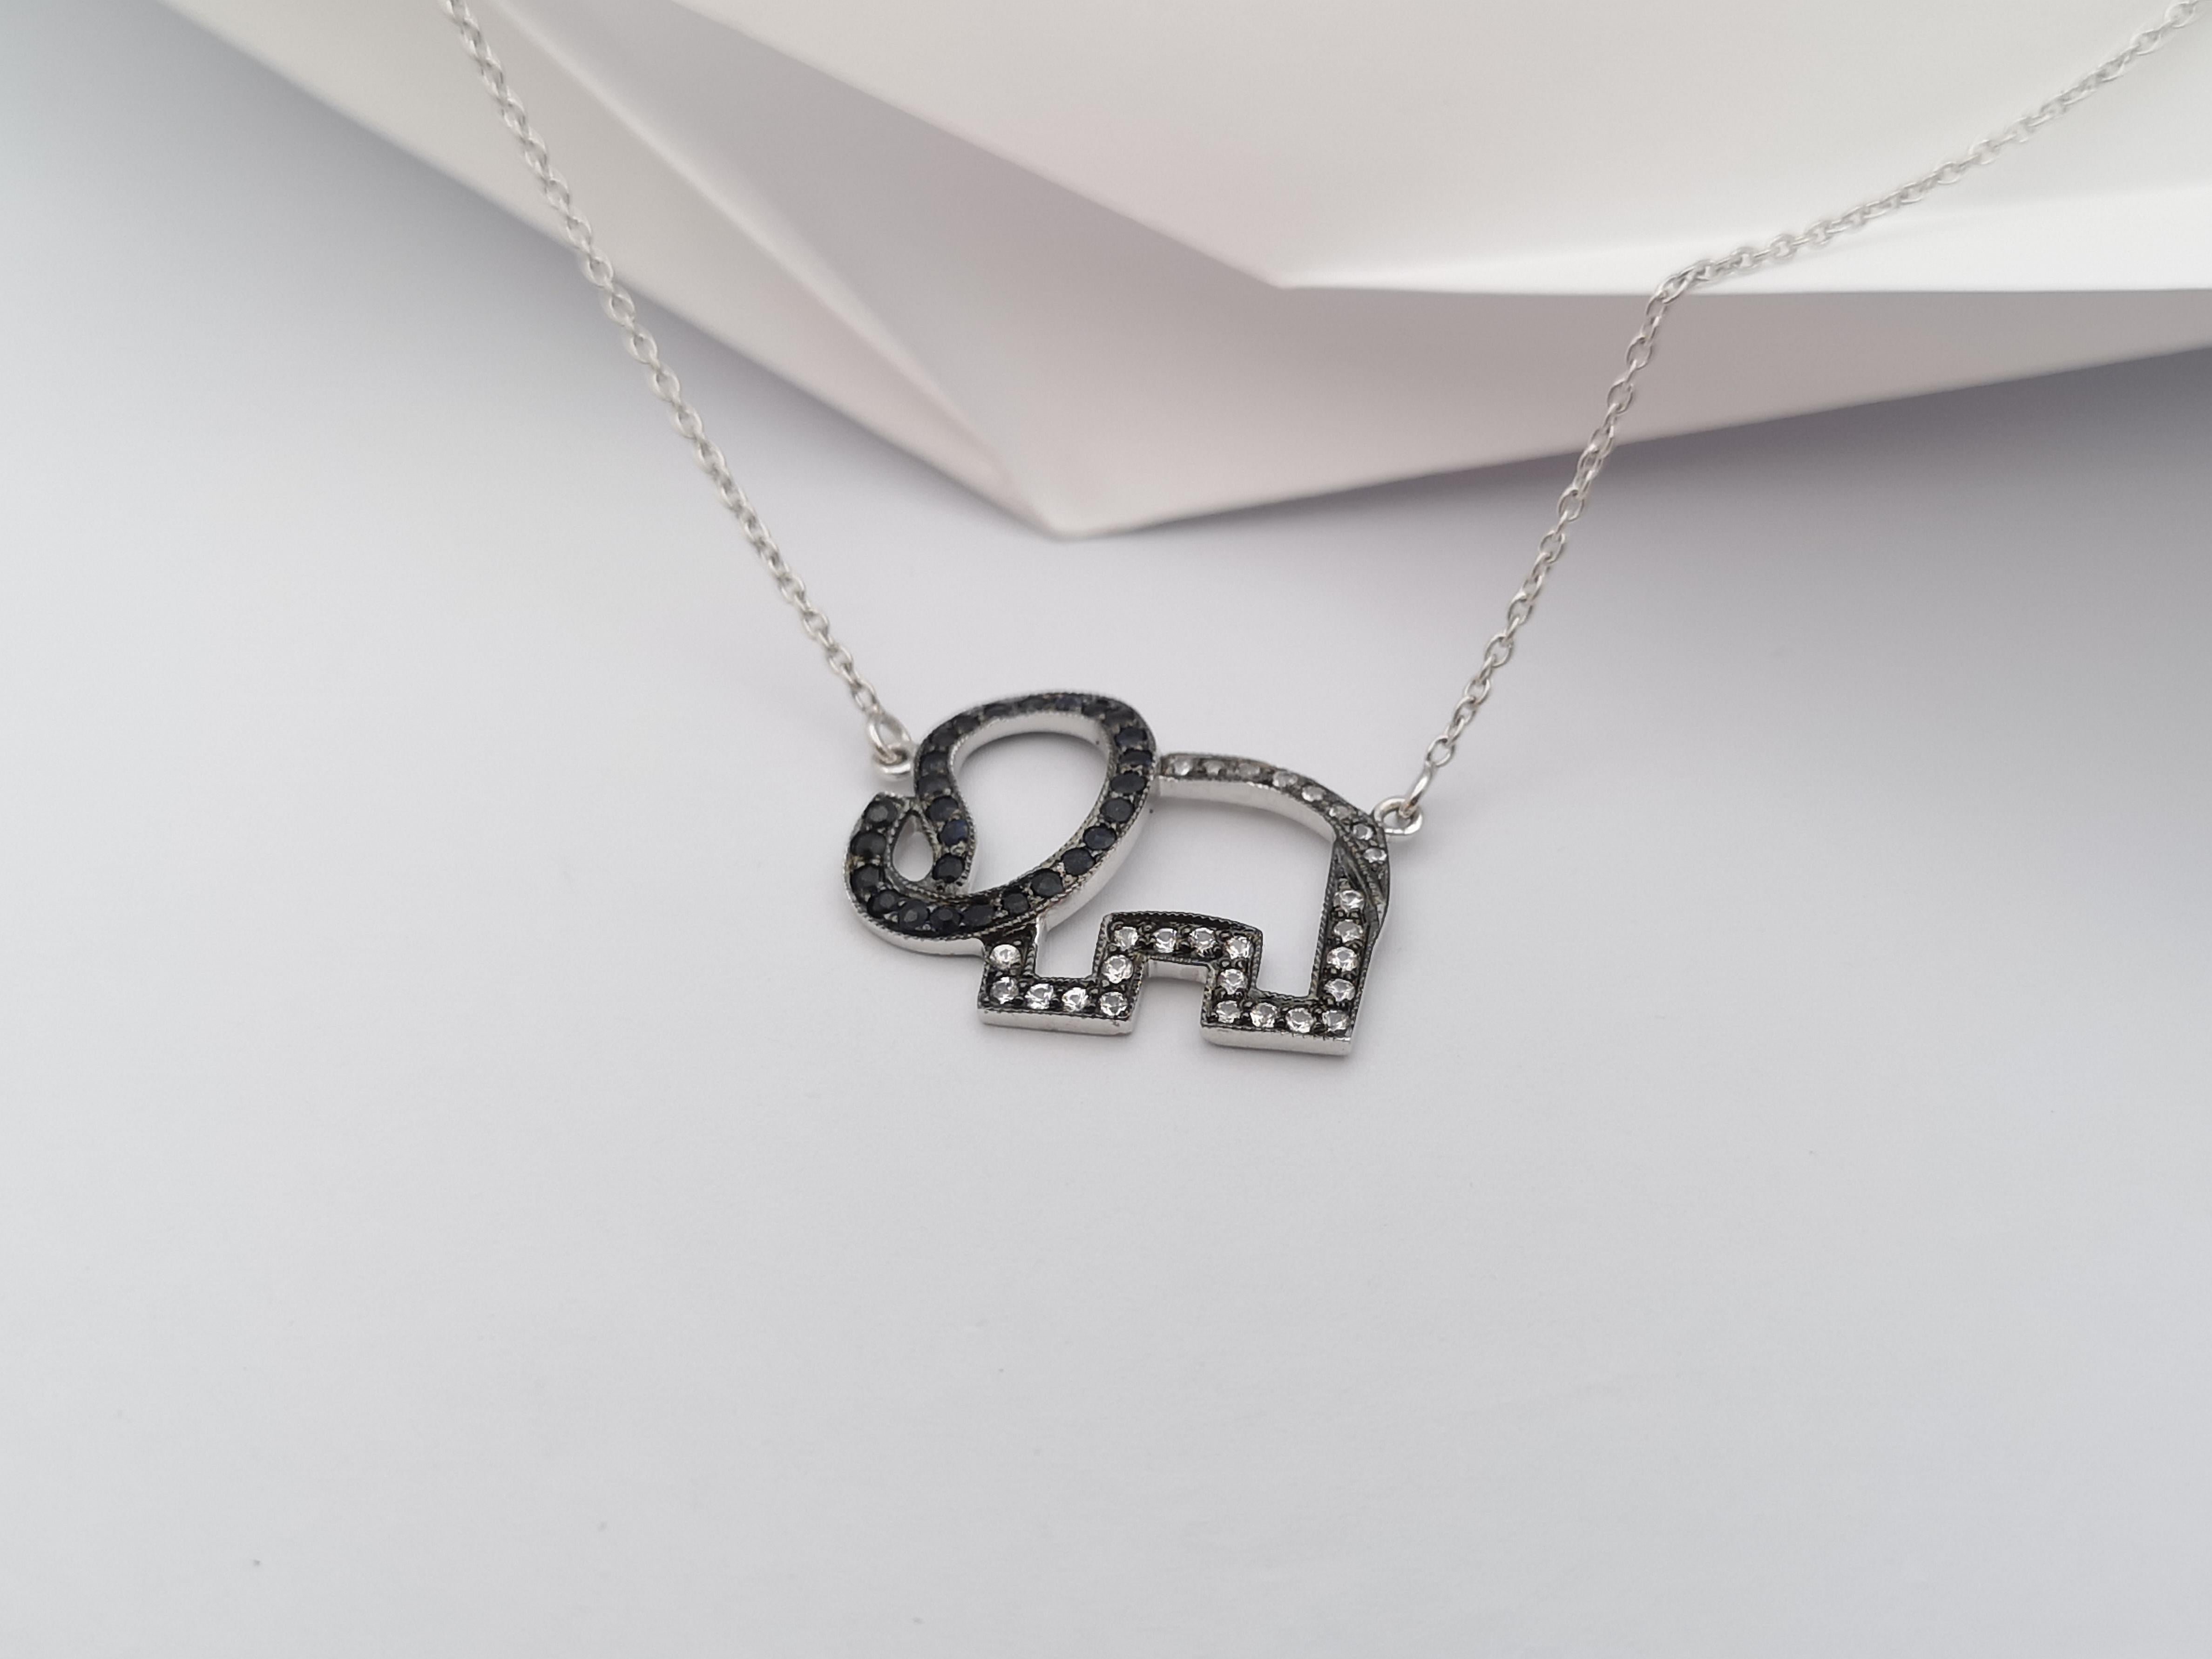 Black Sapphire and White Sapphire Necklace set in Silver Settings

Width:  1.9 cm 
Length:  46.0 cm
Total Weight: 3.42 grams

*Please note that the silver setting is plated with rhodium to promote shine and help prevent oxidation.  However, with the